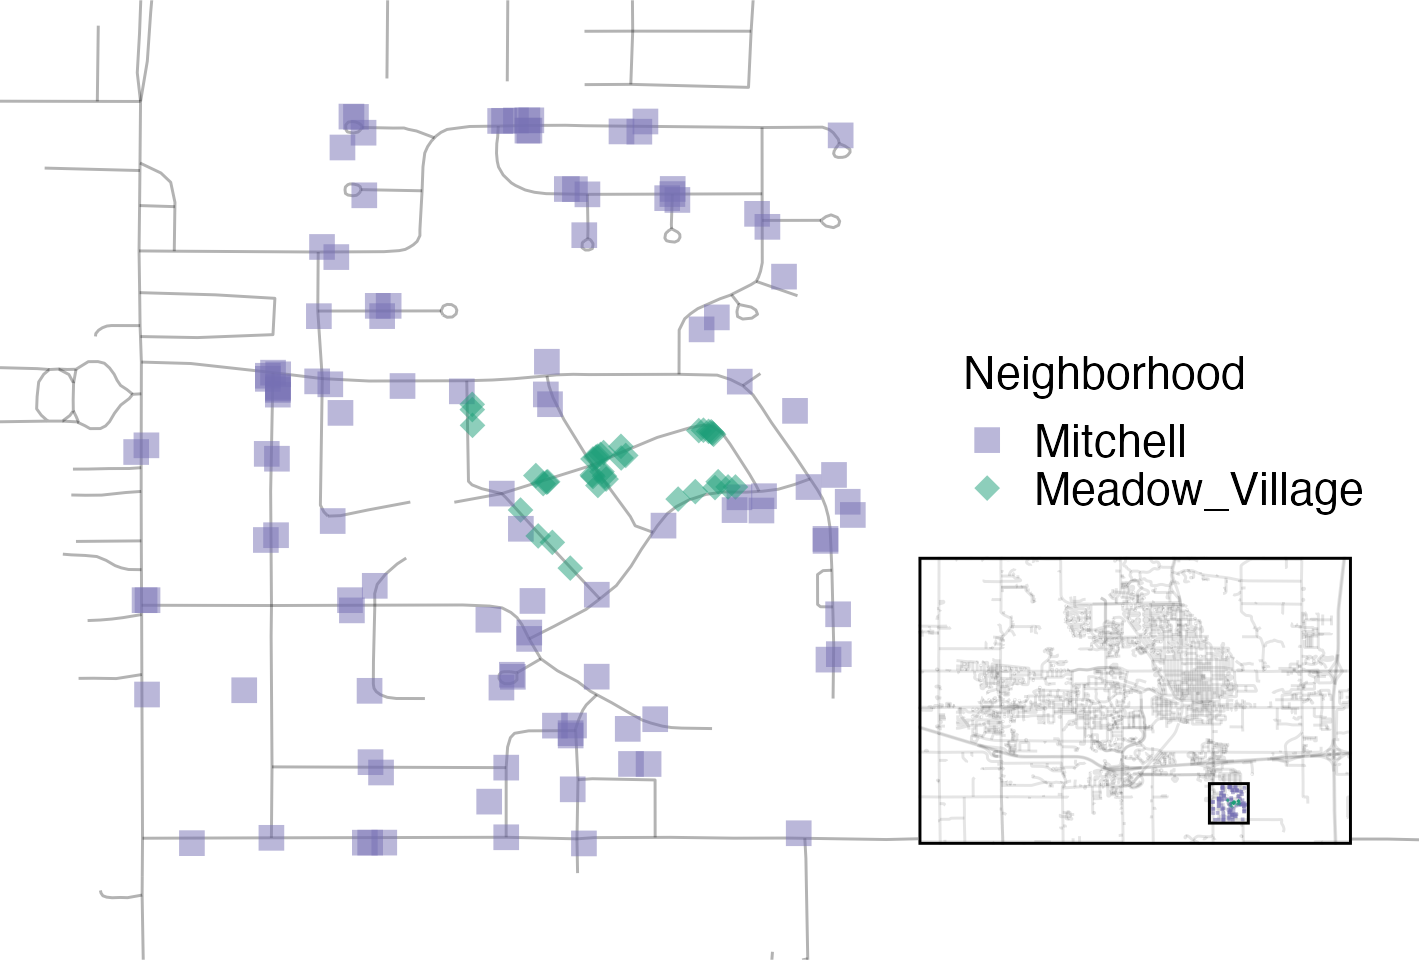 A scatter plot of locations of homes in Meadow Village and Mitchell. The small number of Meadow Village properties are enclosed inside the the ones labeled as being in Mitchell.